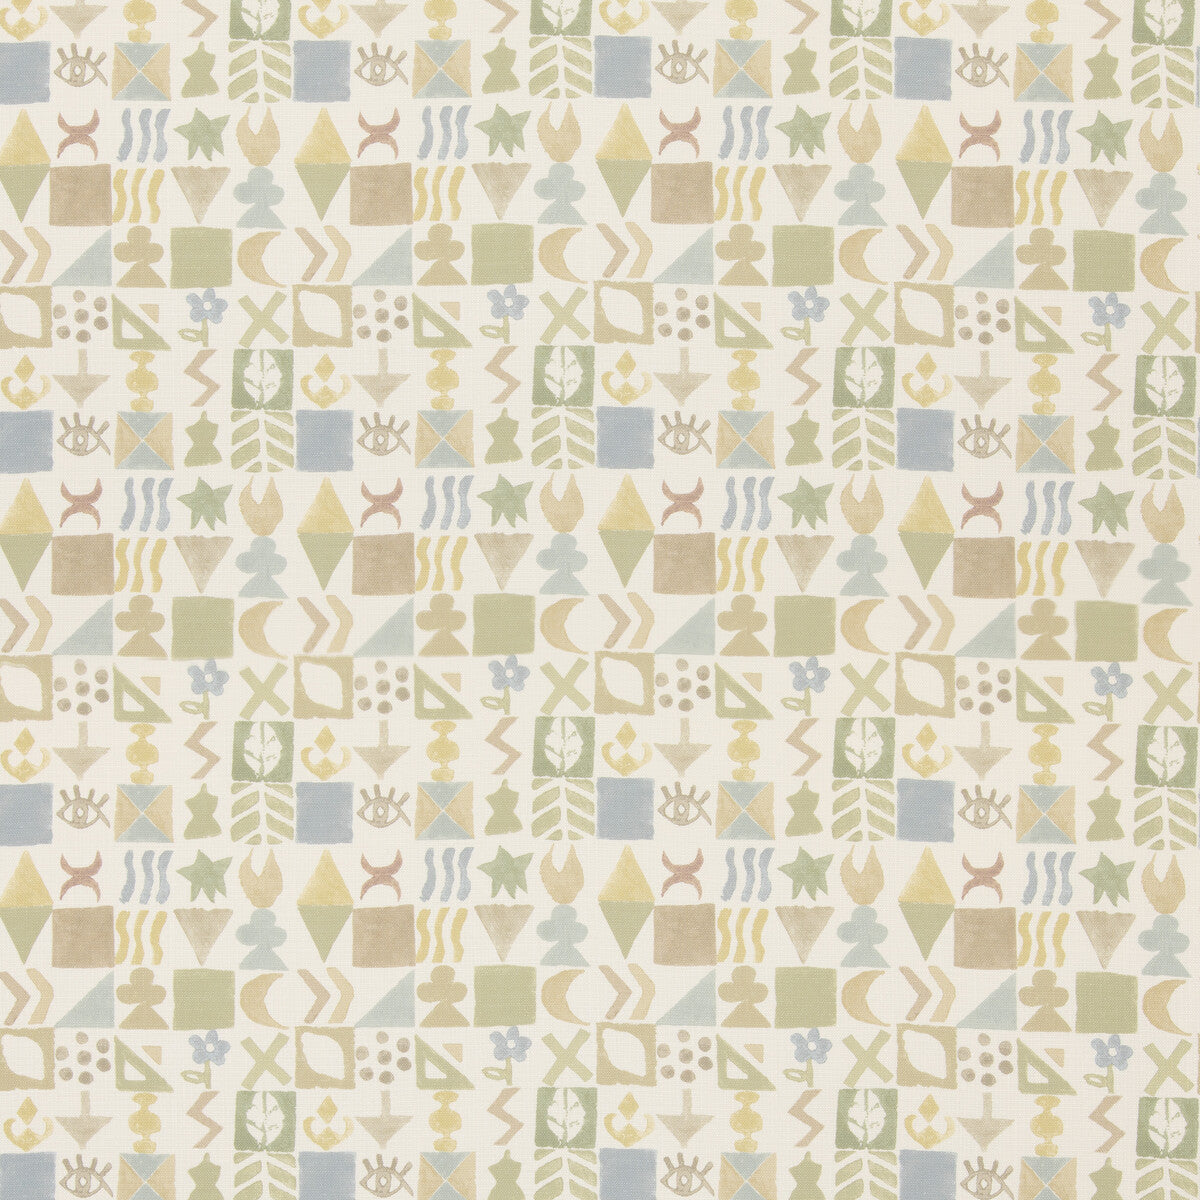 Potato Print fabric in sage color - pattern BP11049.4.0 - by G P &amp; J Baker in the X Kit Kemp Prints And Embroideries collection